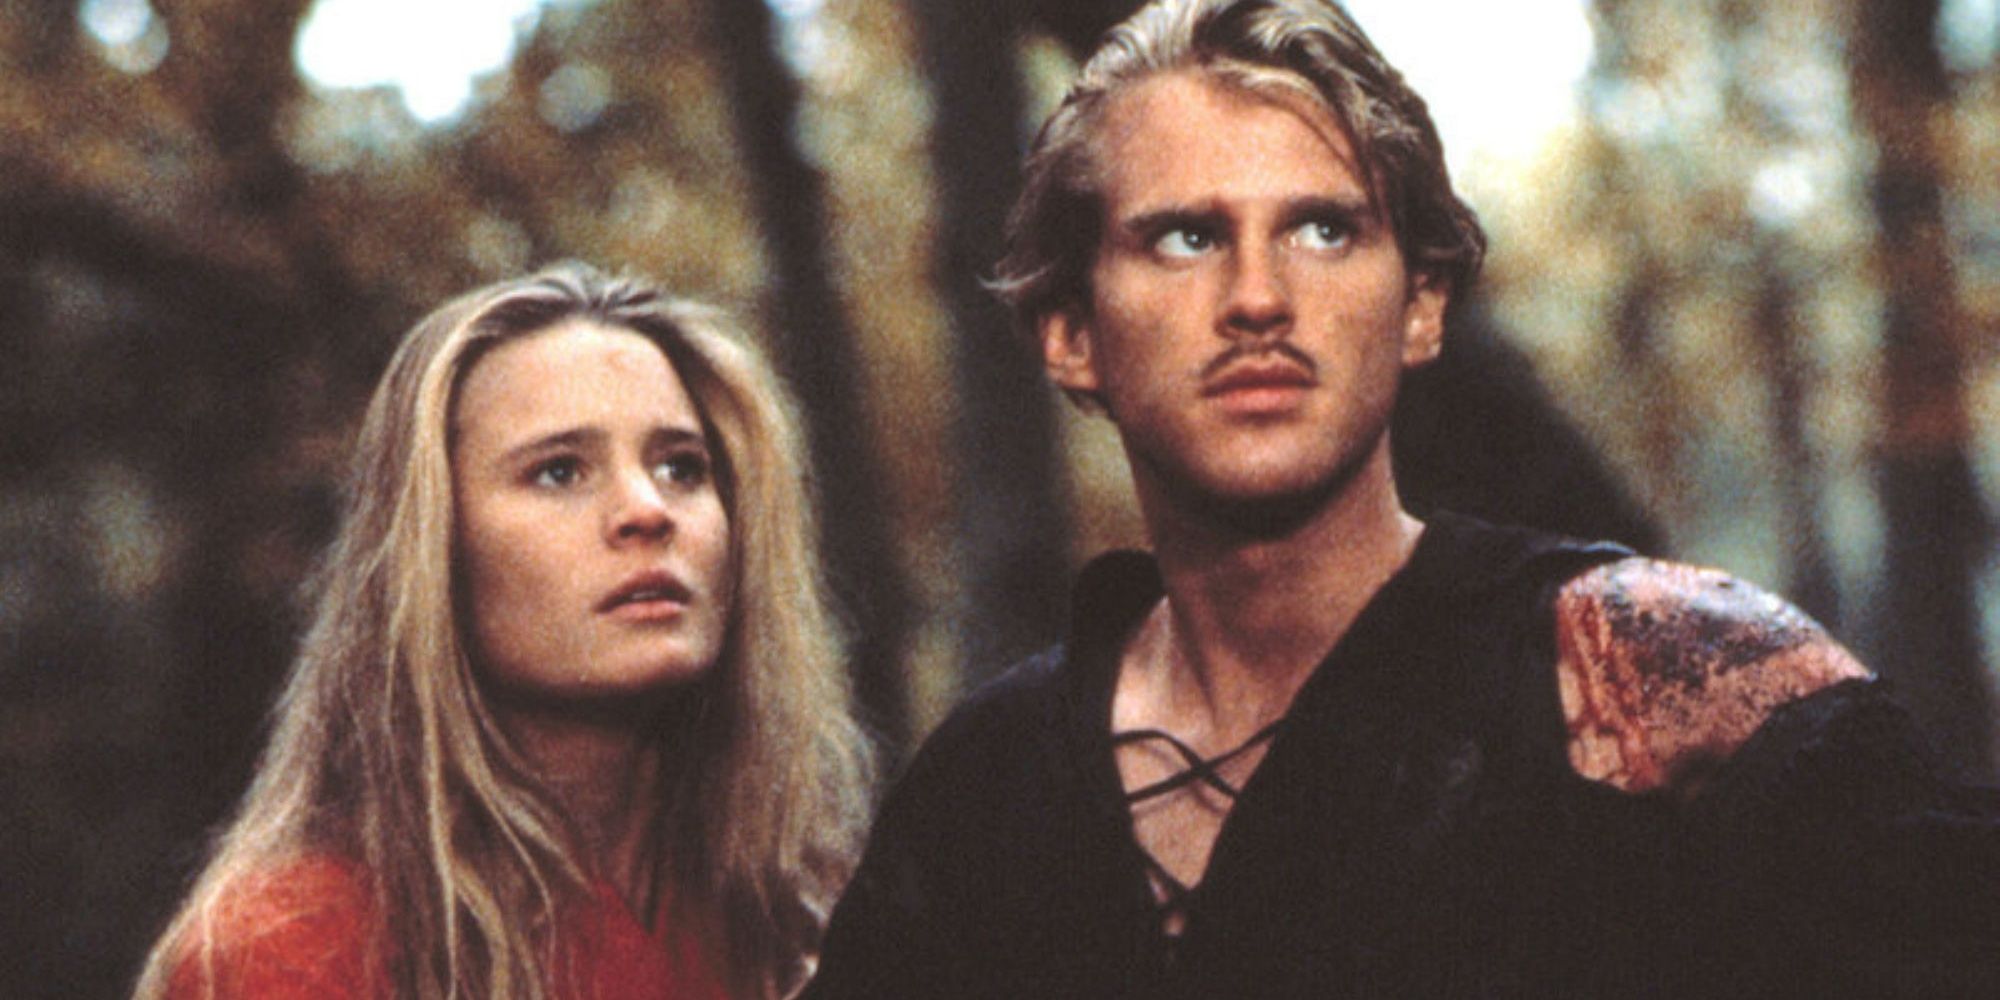 Buttercup and Wesley in the forest in The Princess Bride.